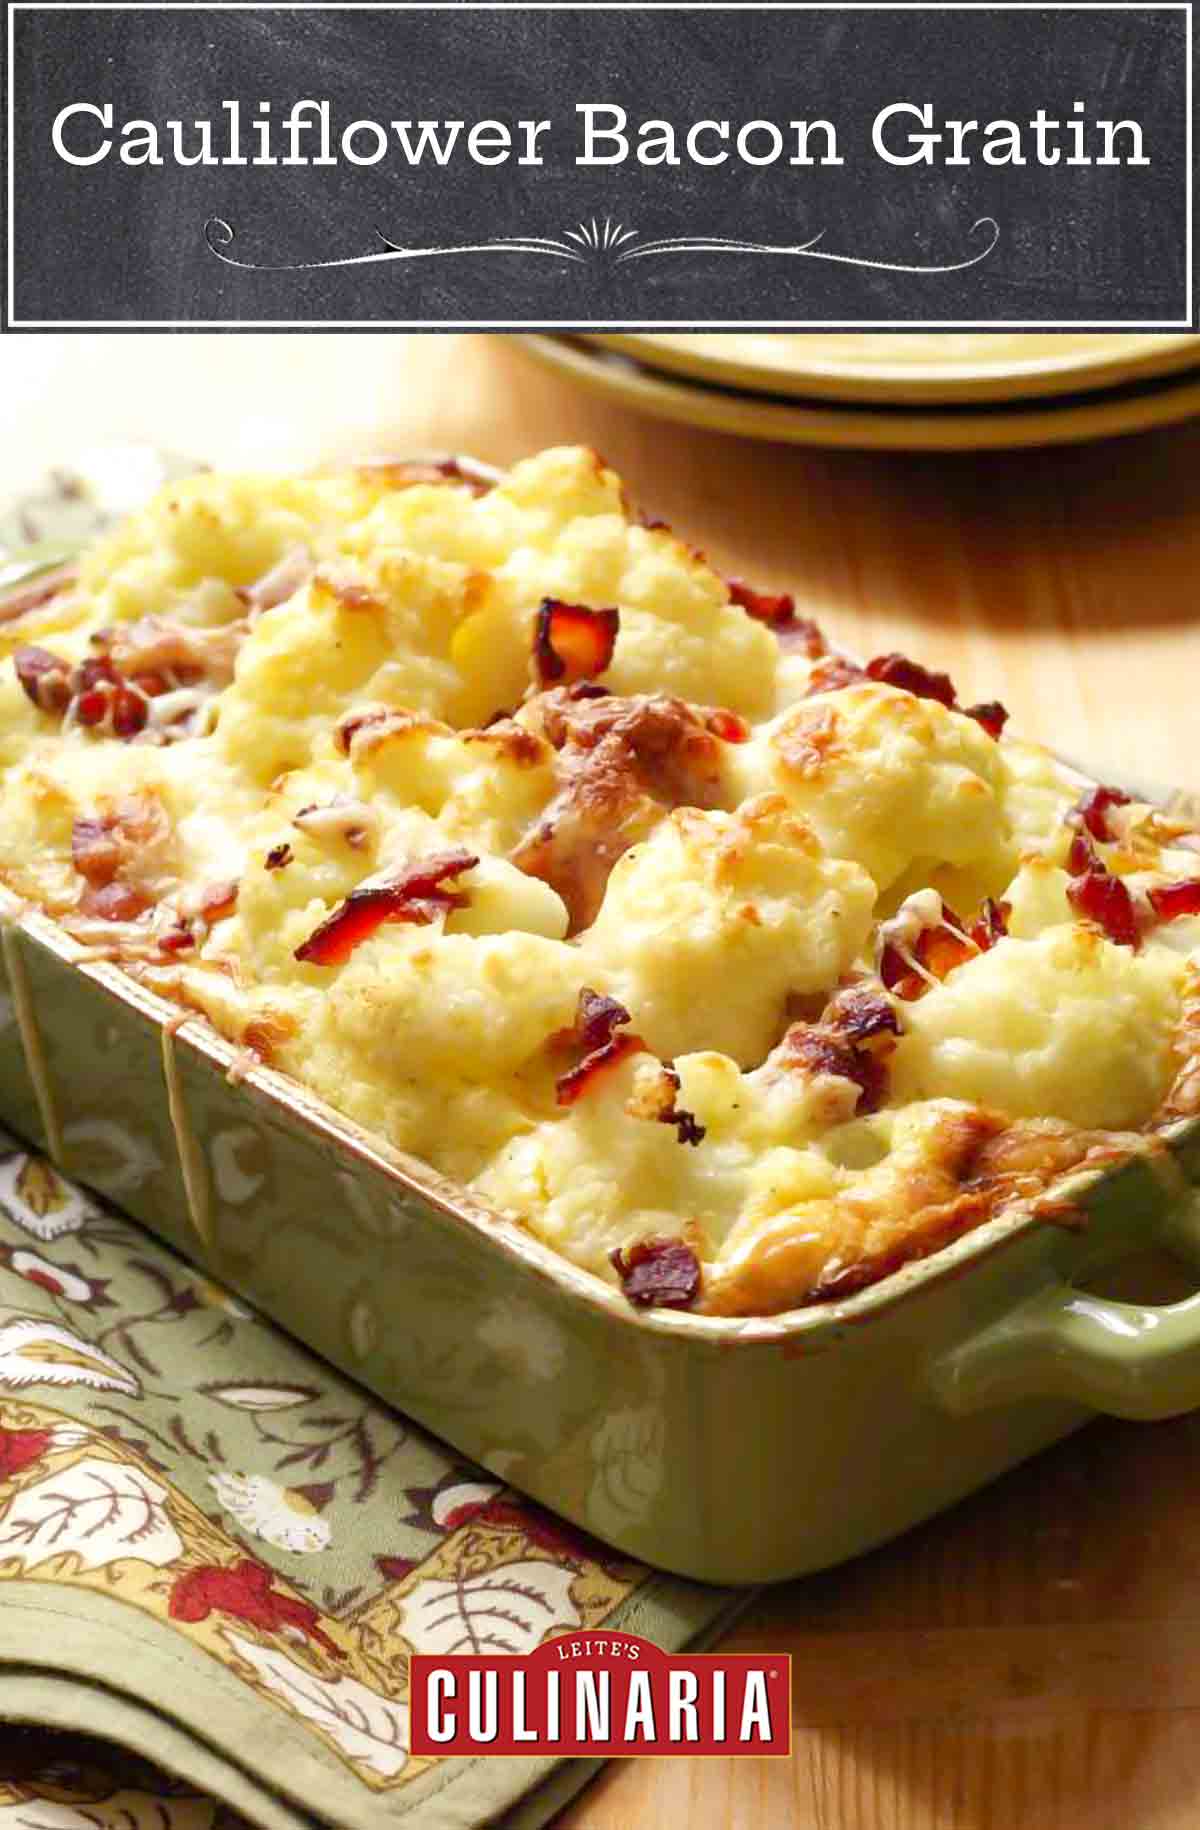 Cauliflower bacon gratin in a large green rectangular baking dish with melted cheese.